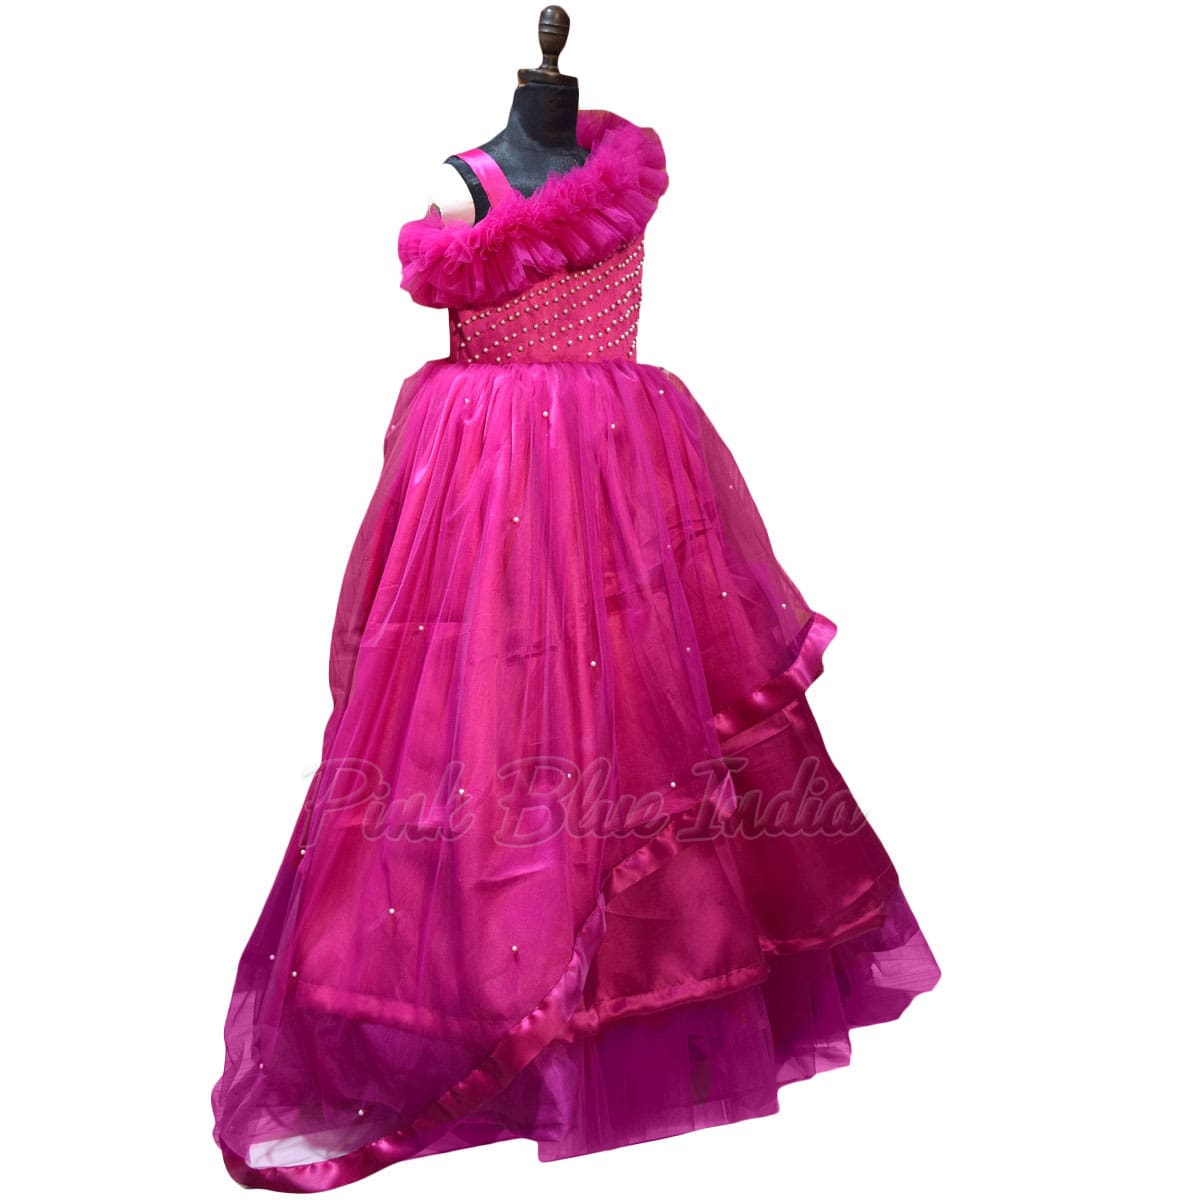 Matching Formal Dresses, Princess Dress, Mommy and Me Outfit, Girl Bir